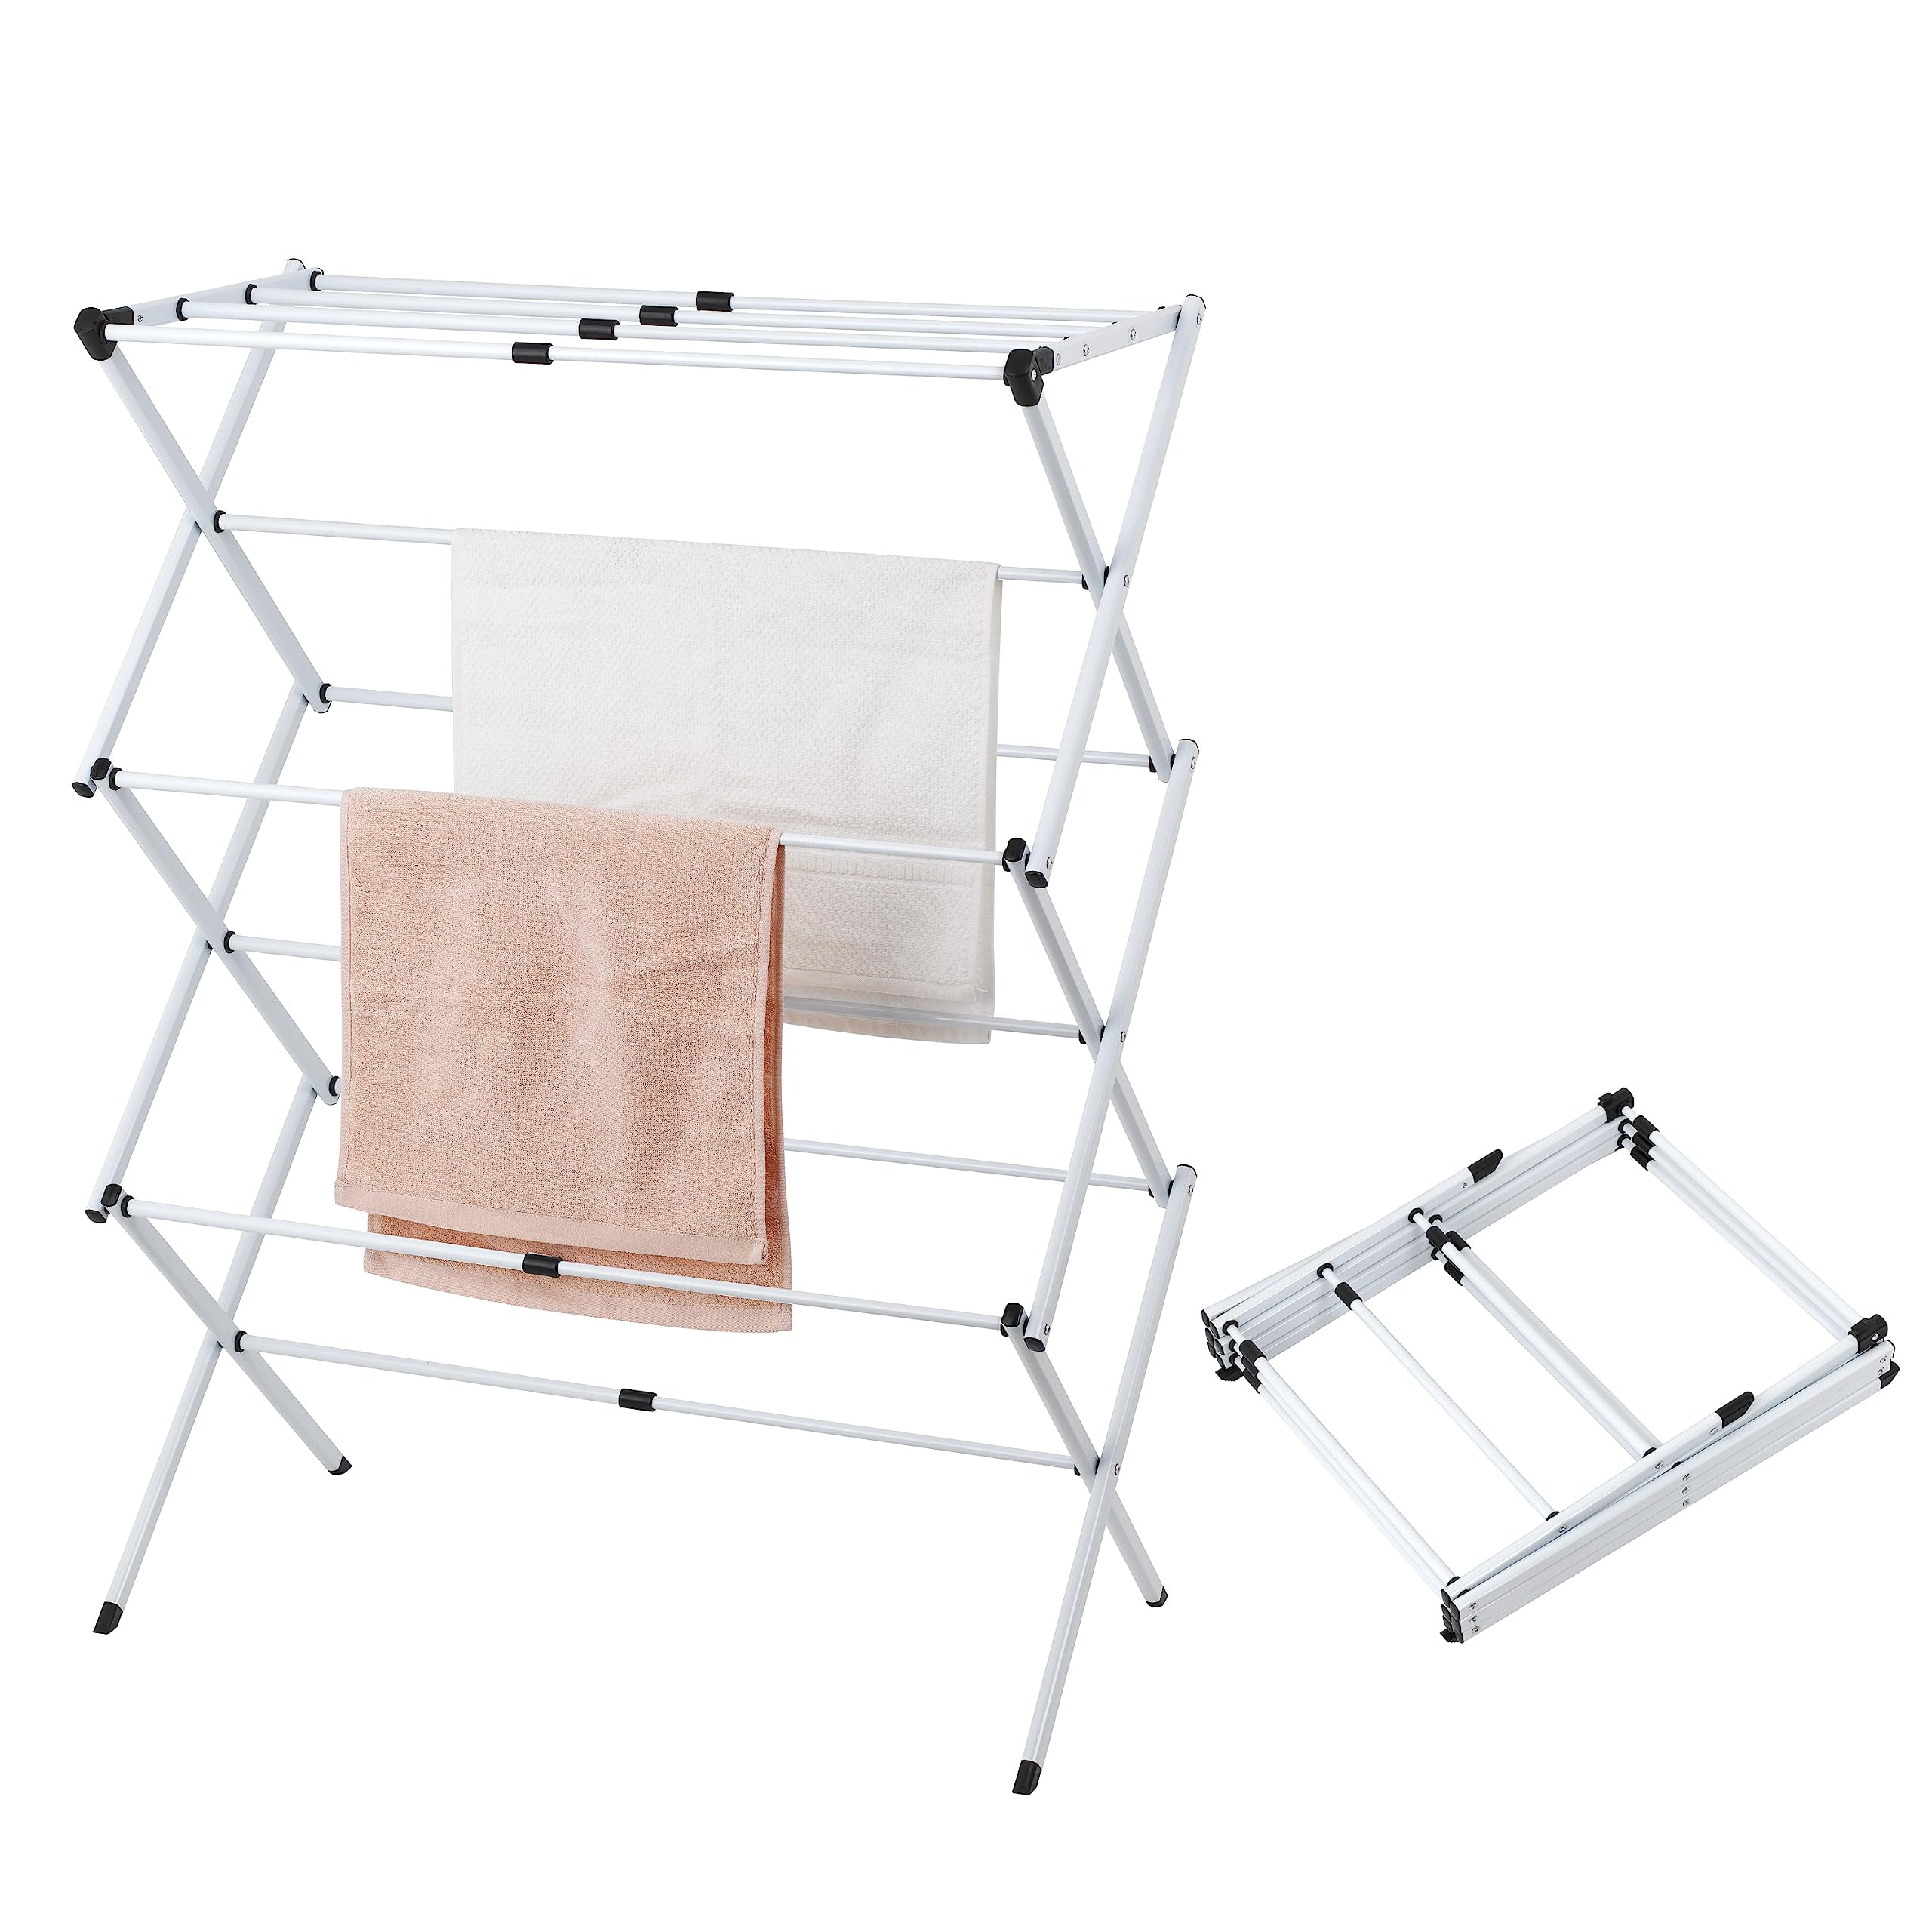 Plastic White and Aluminum Leifheit Clothes Rack, Drying